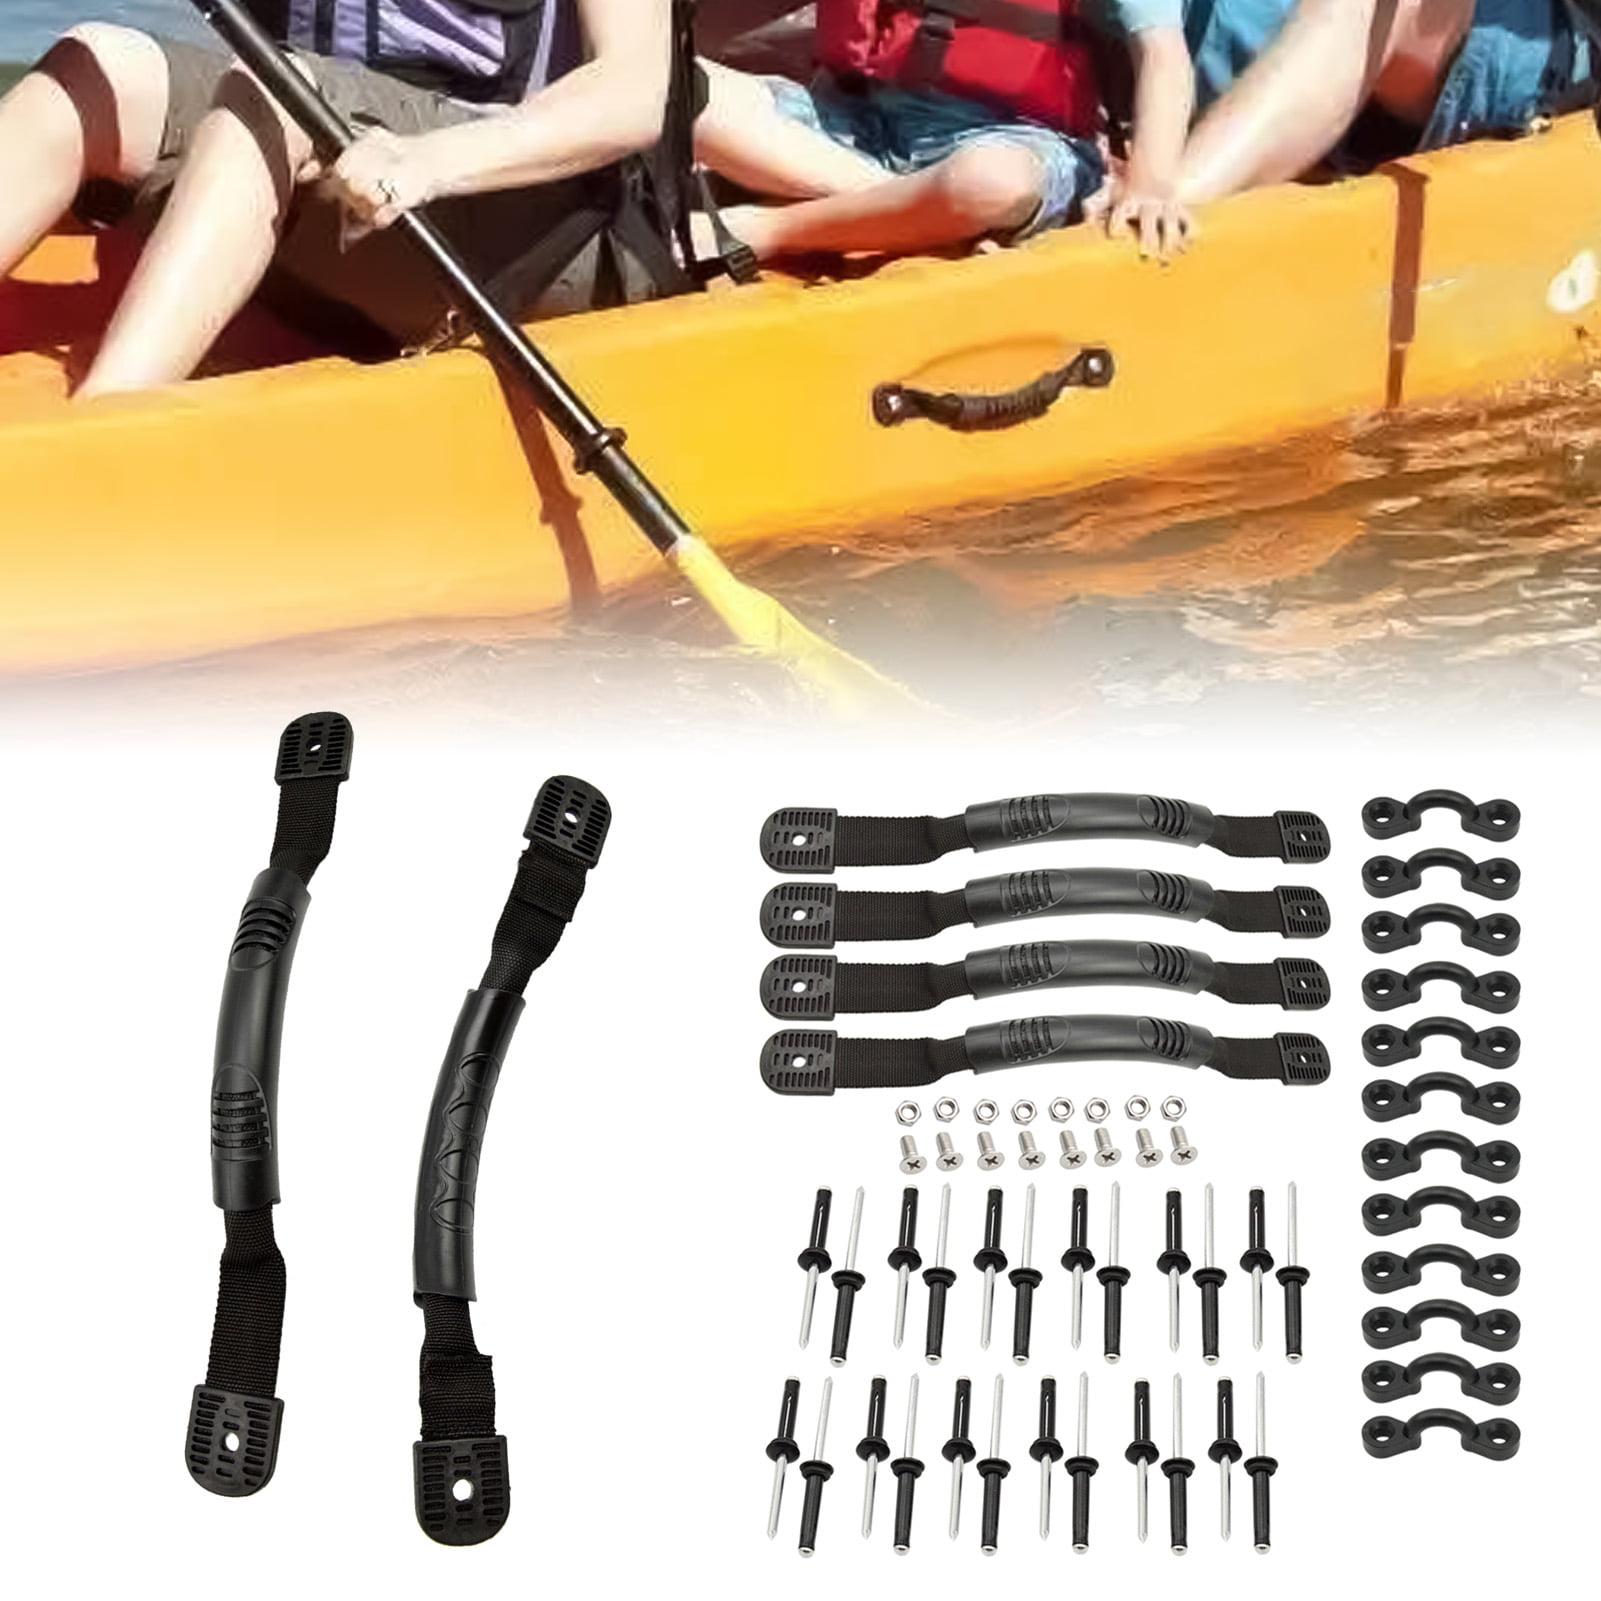 4x Kayak Canoe Boat Side Mount Carry Handle With Bungee Cord Screws Accessories 